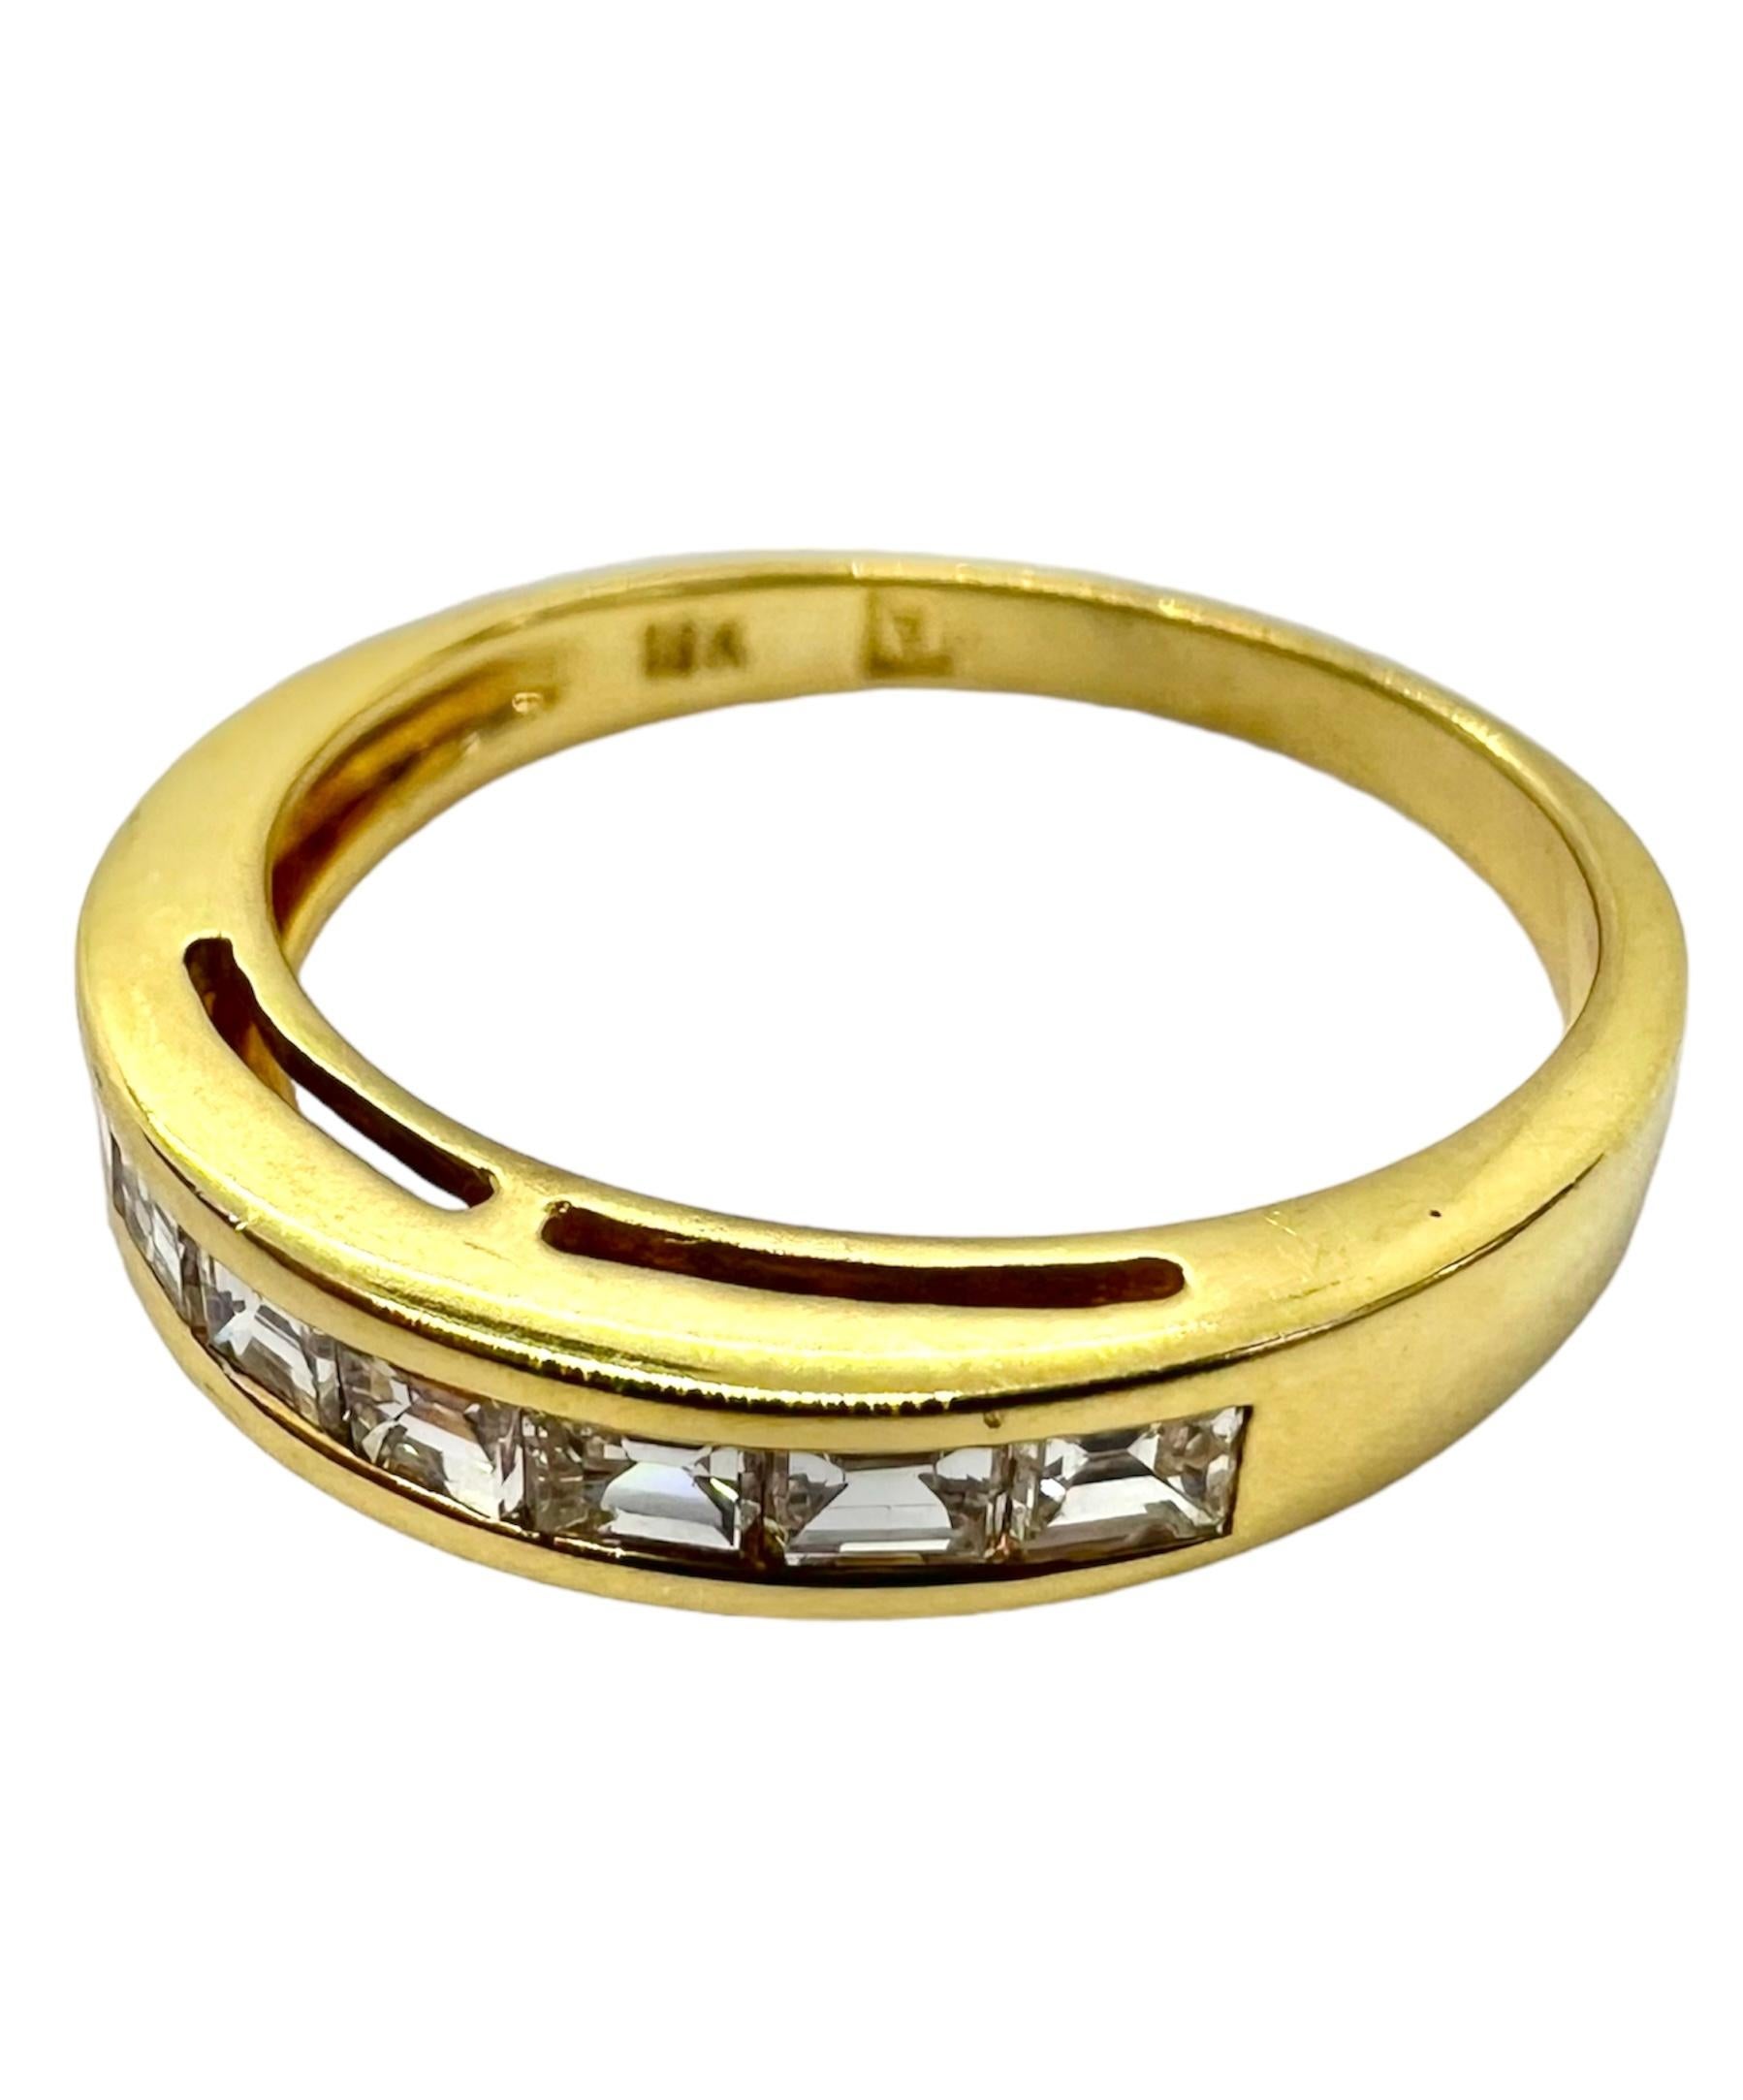 18K yellow gold ring with emerald cut diamonds.

Sophia D by Joseph Dardashti LTD has been known worldwide for 35 years and are inspired by classic Art Deco design that merges with modern manufacturing techniques.  